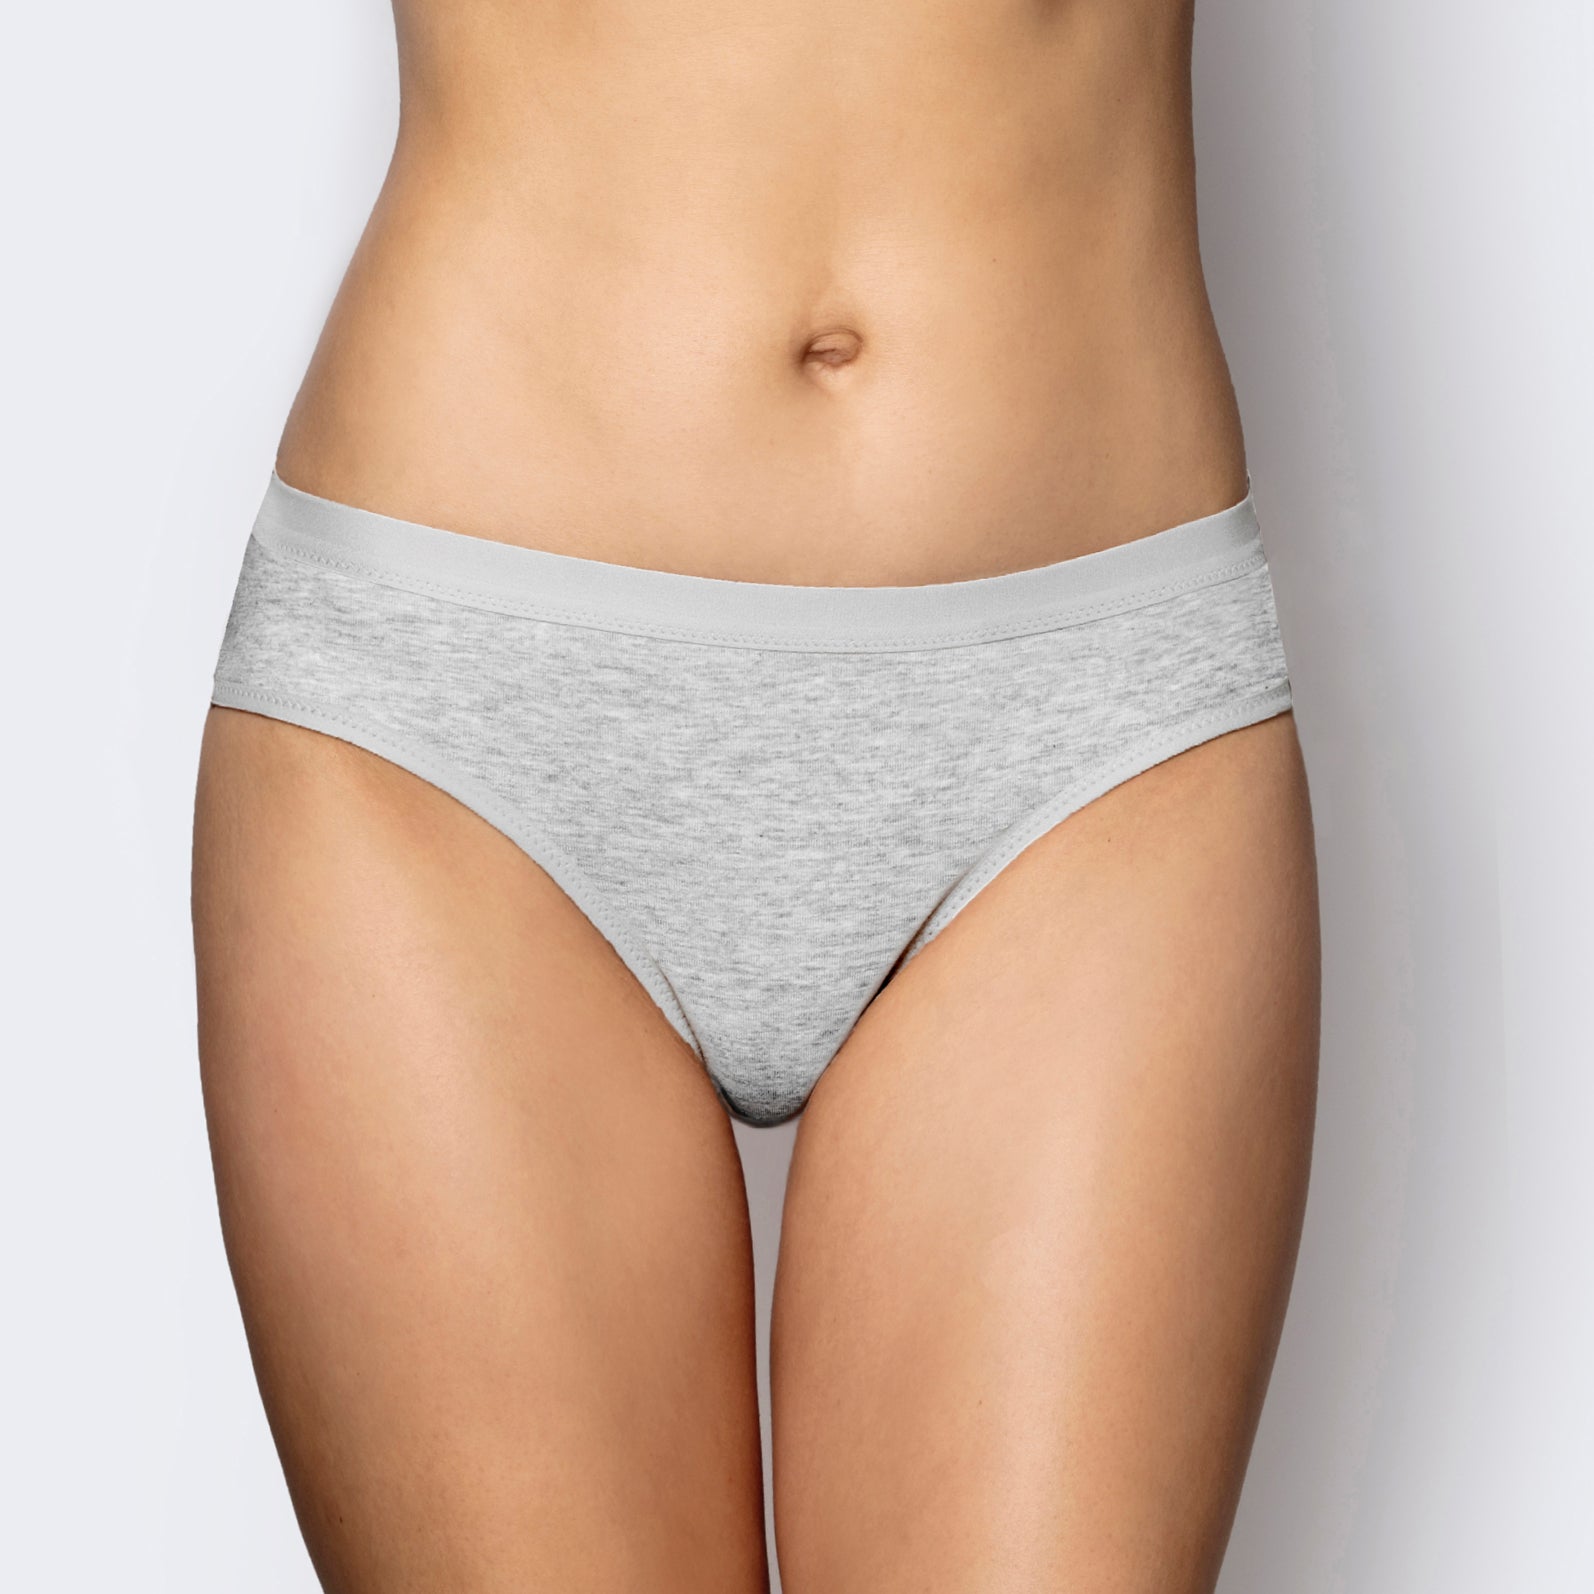 Feel beautiful with lady brief